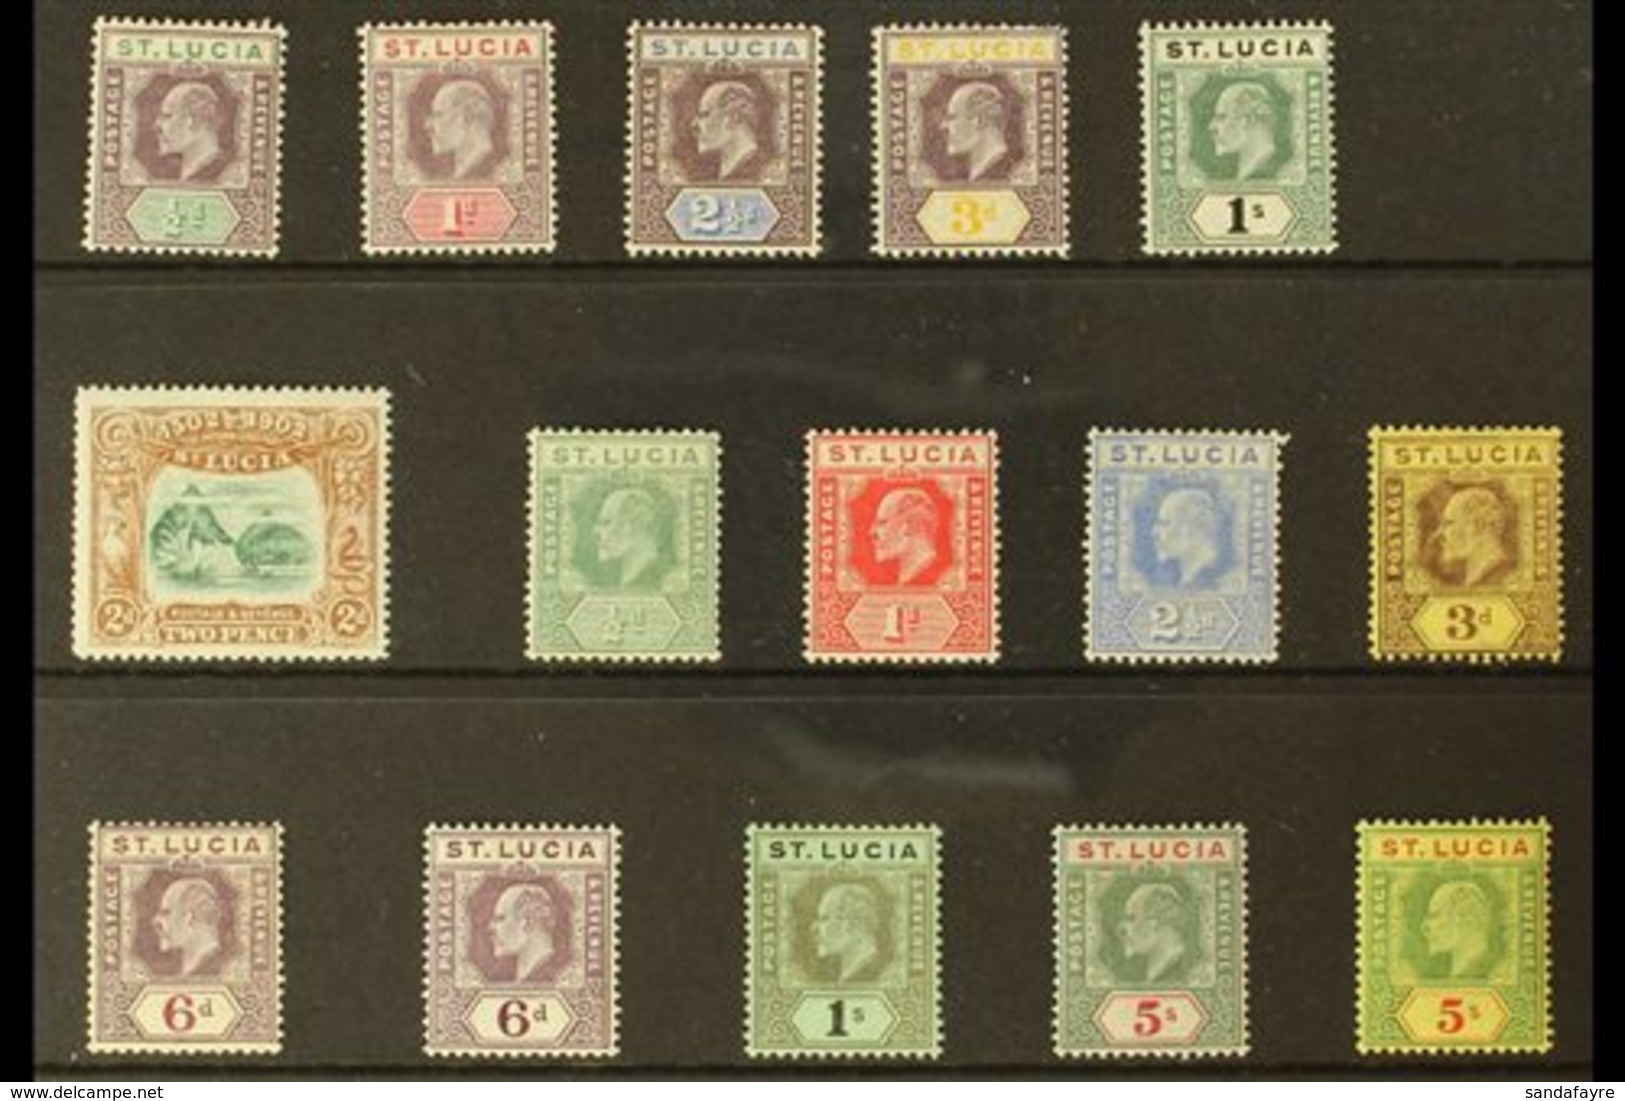 1902-10 MINT KEVII COLLECTION Presented On A Stock Card & Includes 1902-03 CA Wmk Set, 1902 2d Columbus Anniversary & 19 - Ste Lucie (...-1978)